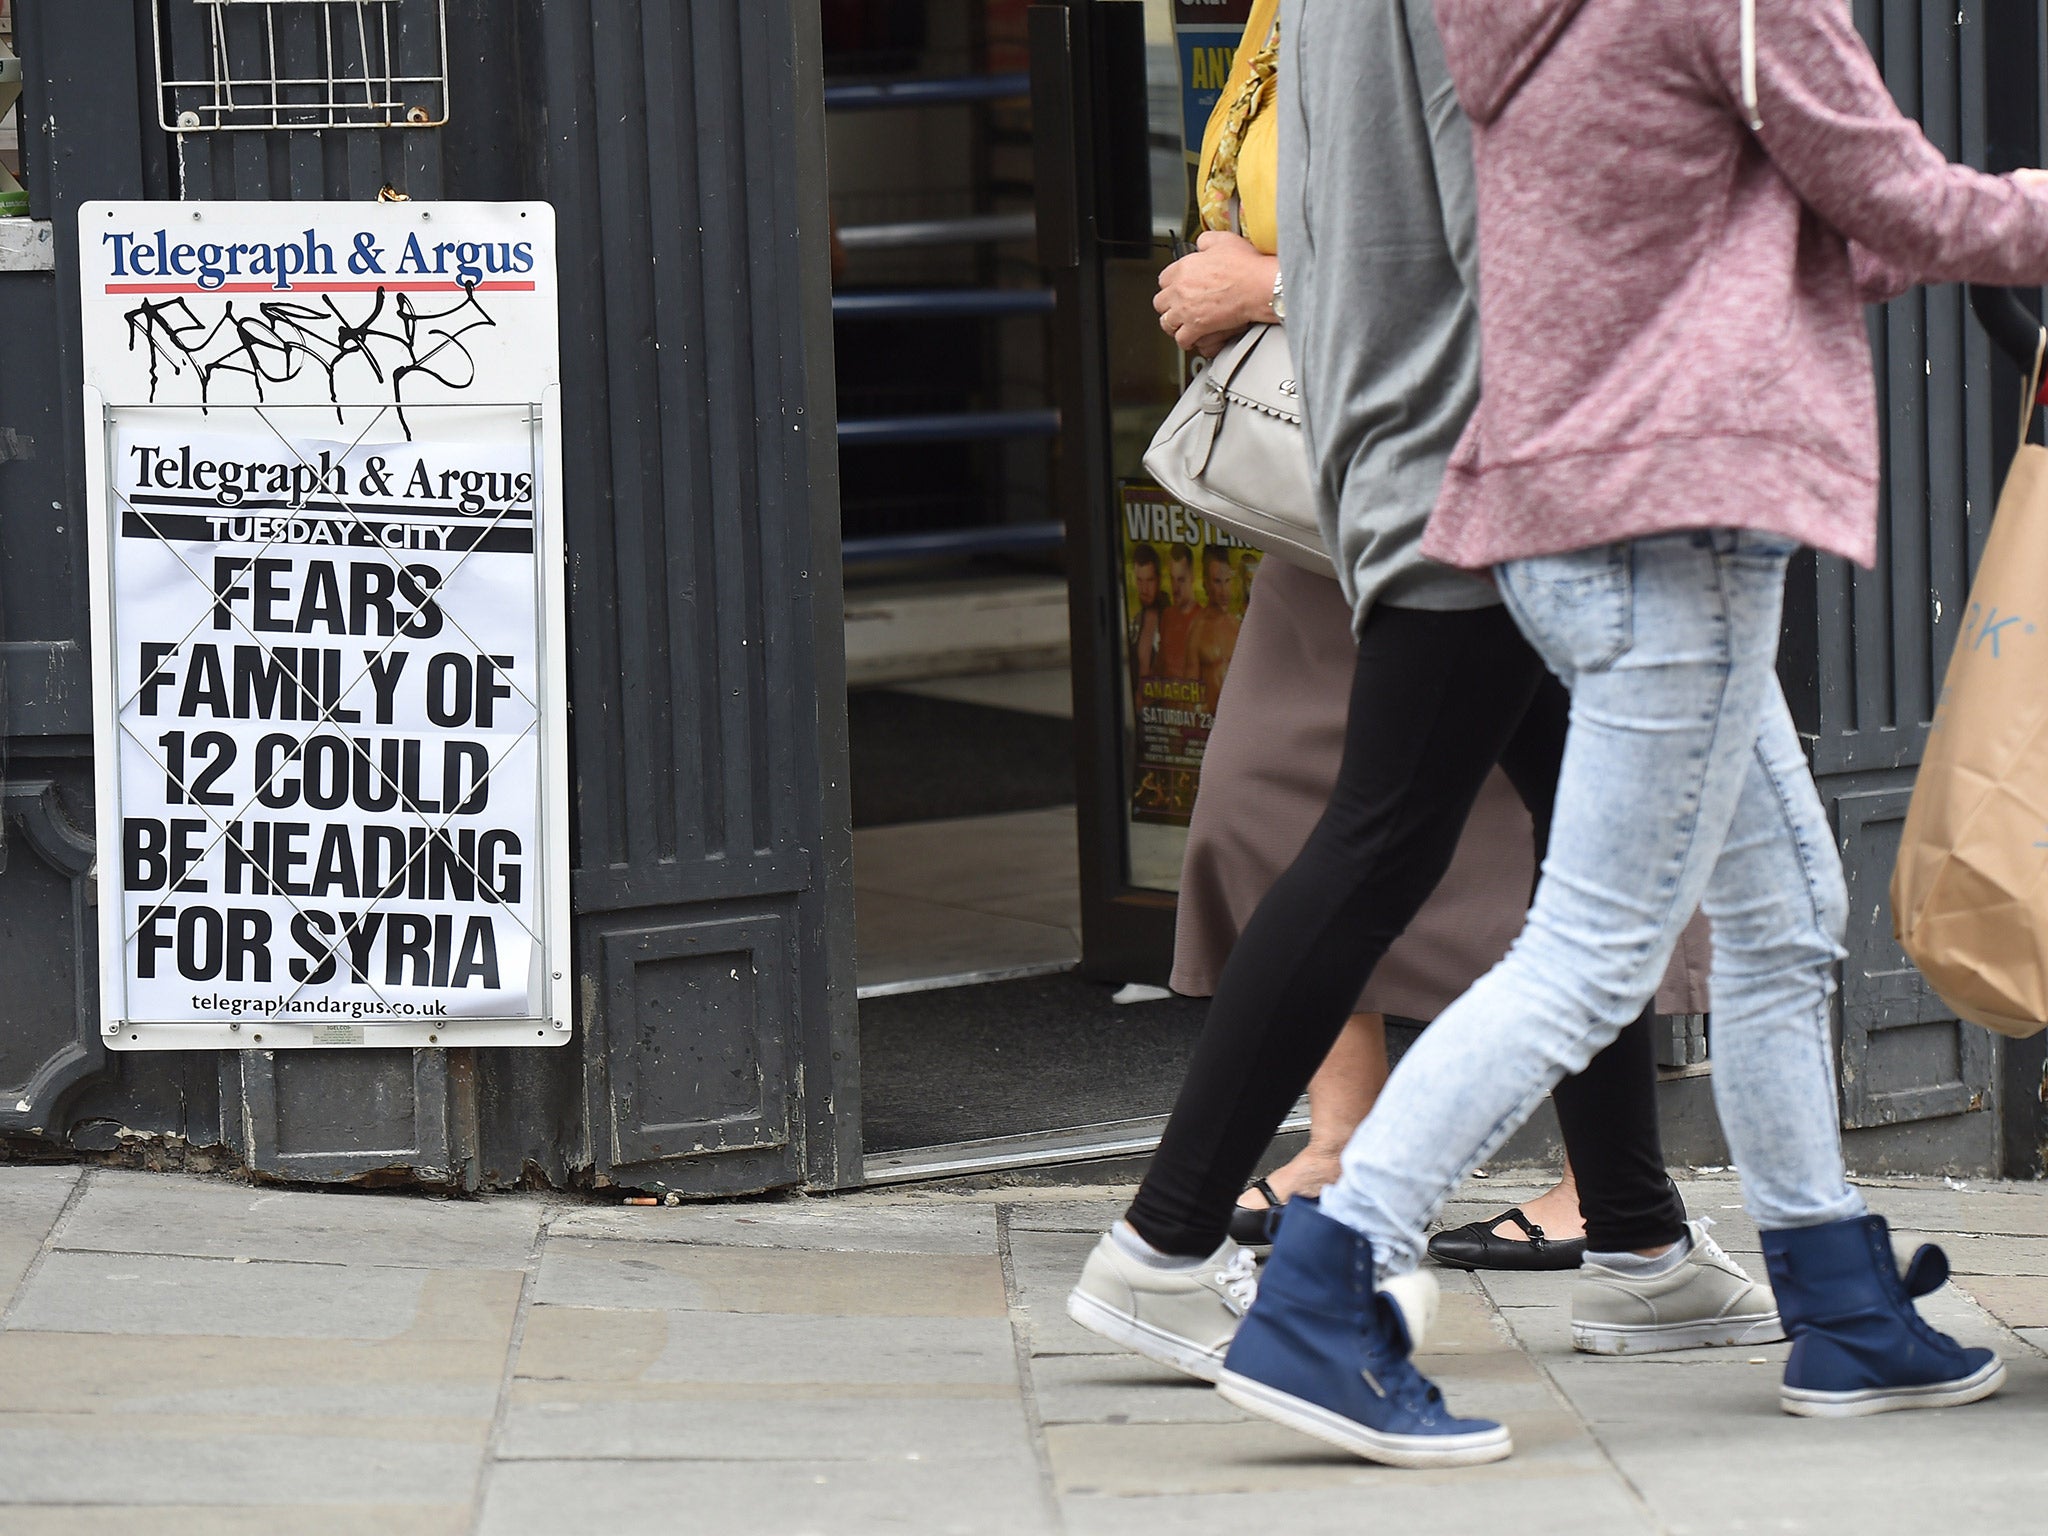 Pedestrians walk past a newsagents displaying a local paper headline on a notice board referring to fears regarding a missing family of 12 in Bradford